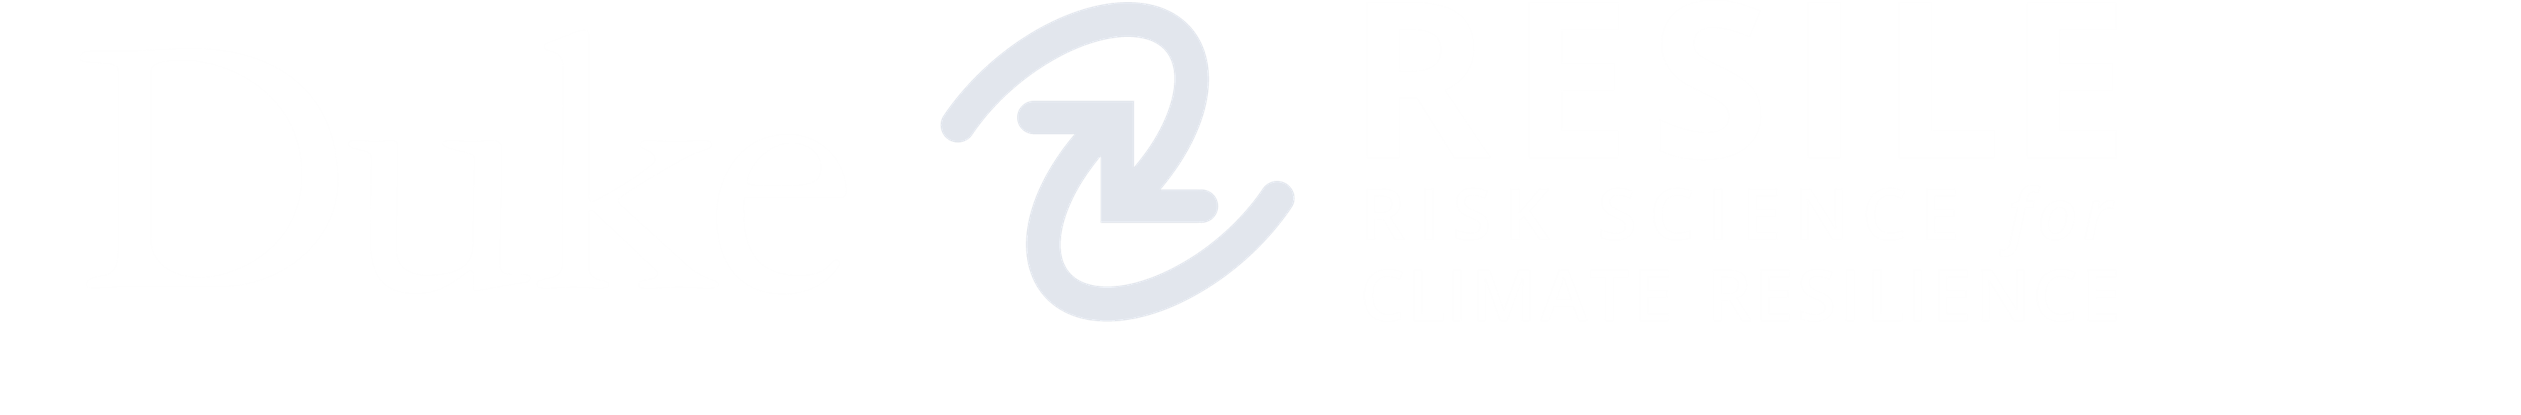 RESILE: Risk Science for Climate Resilience